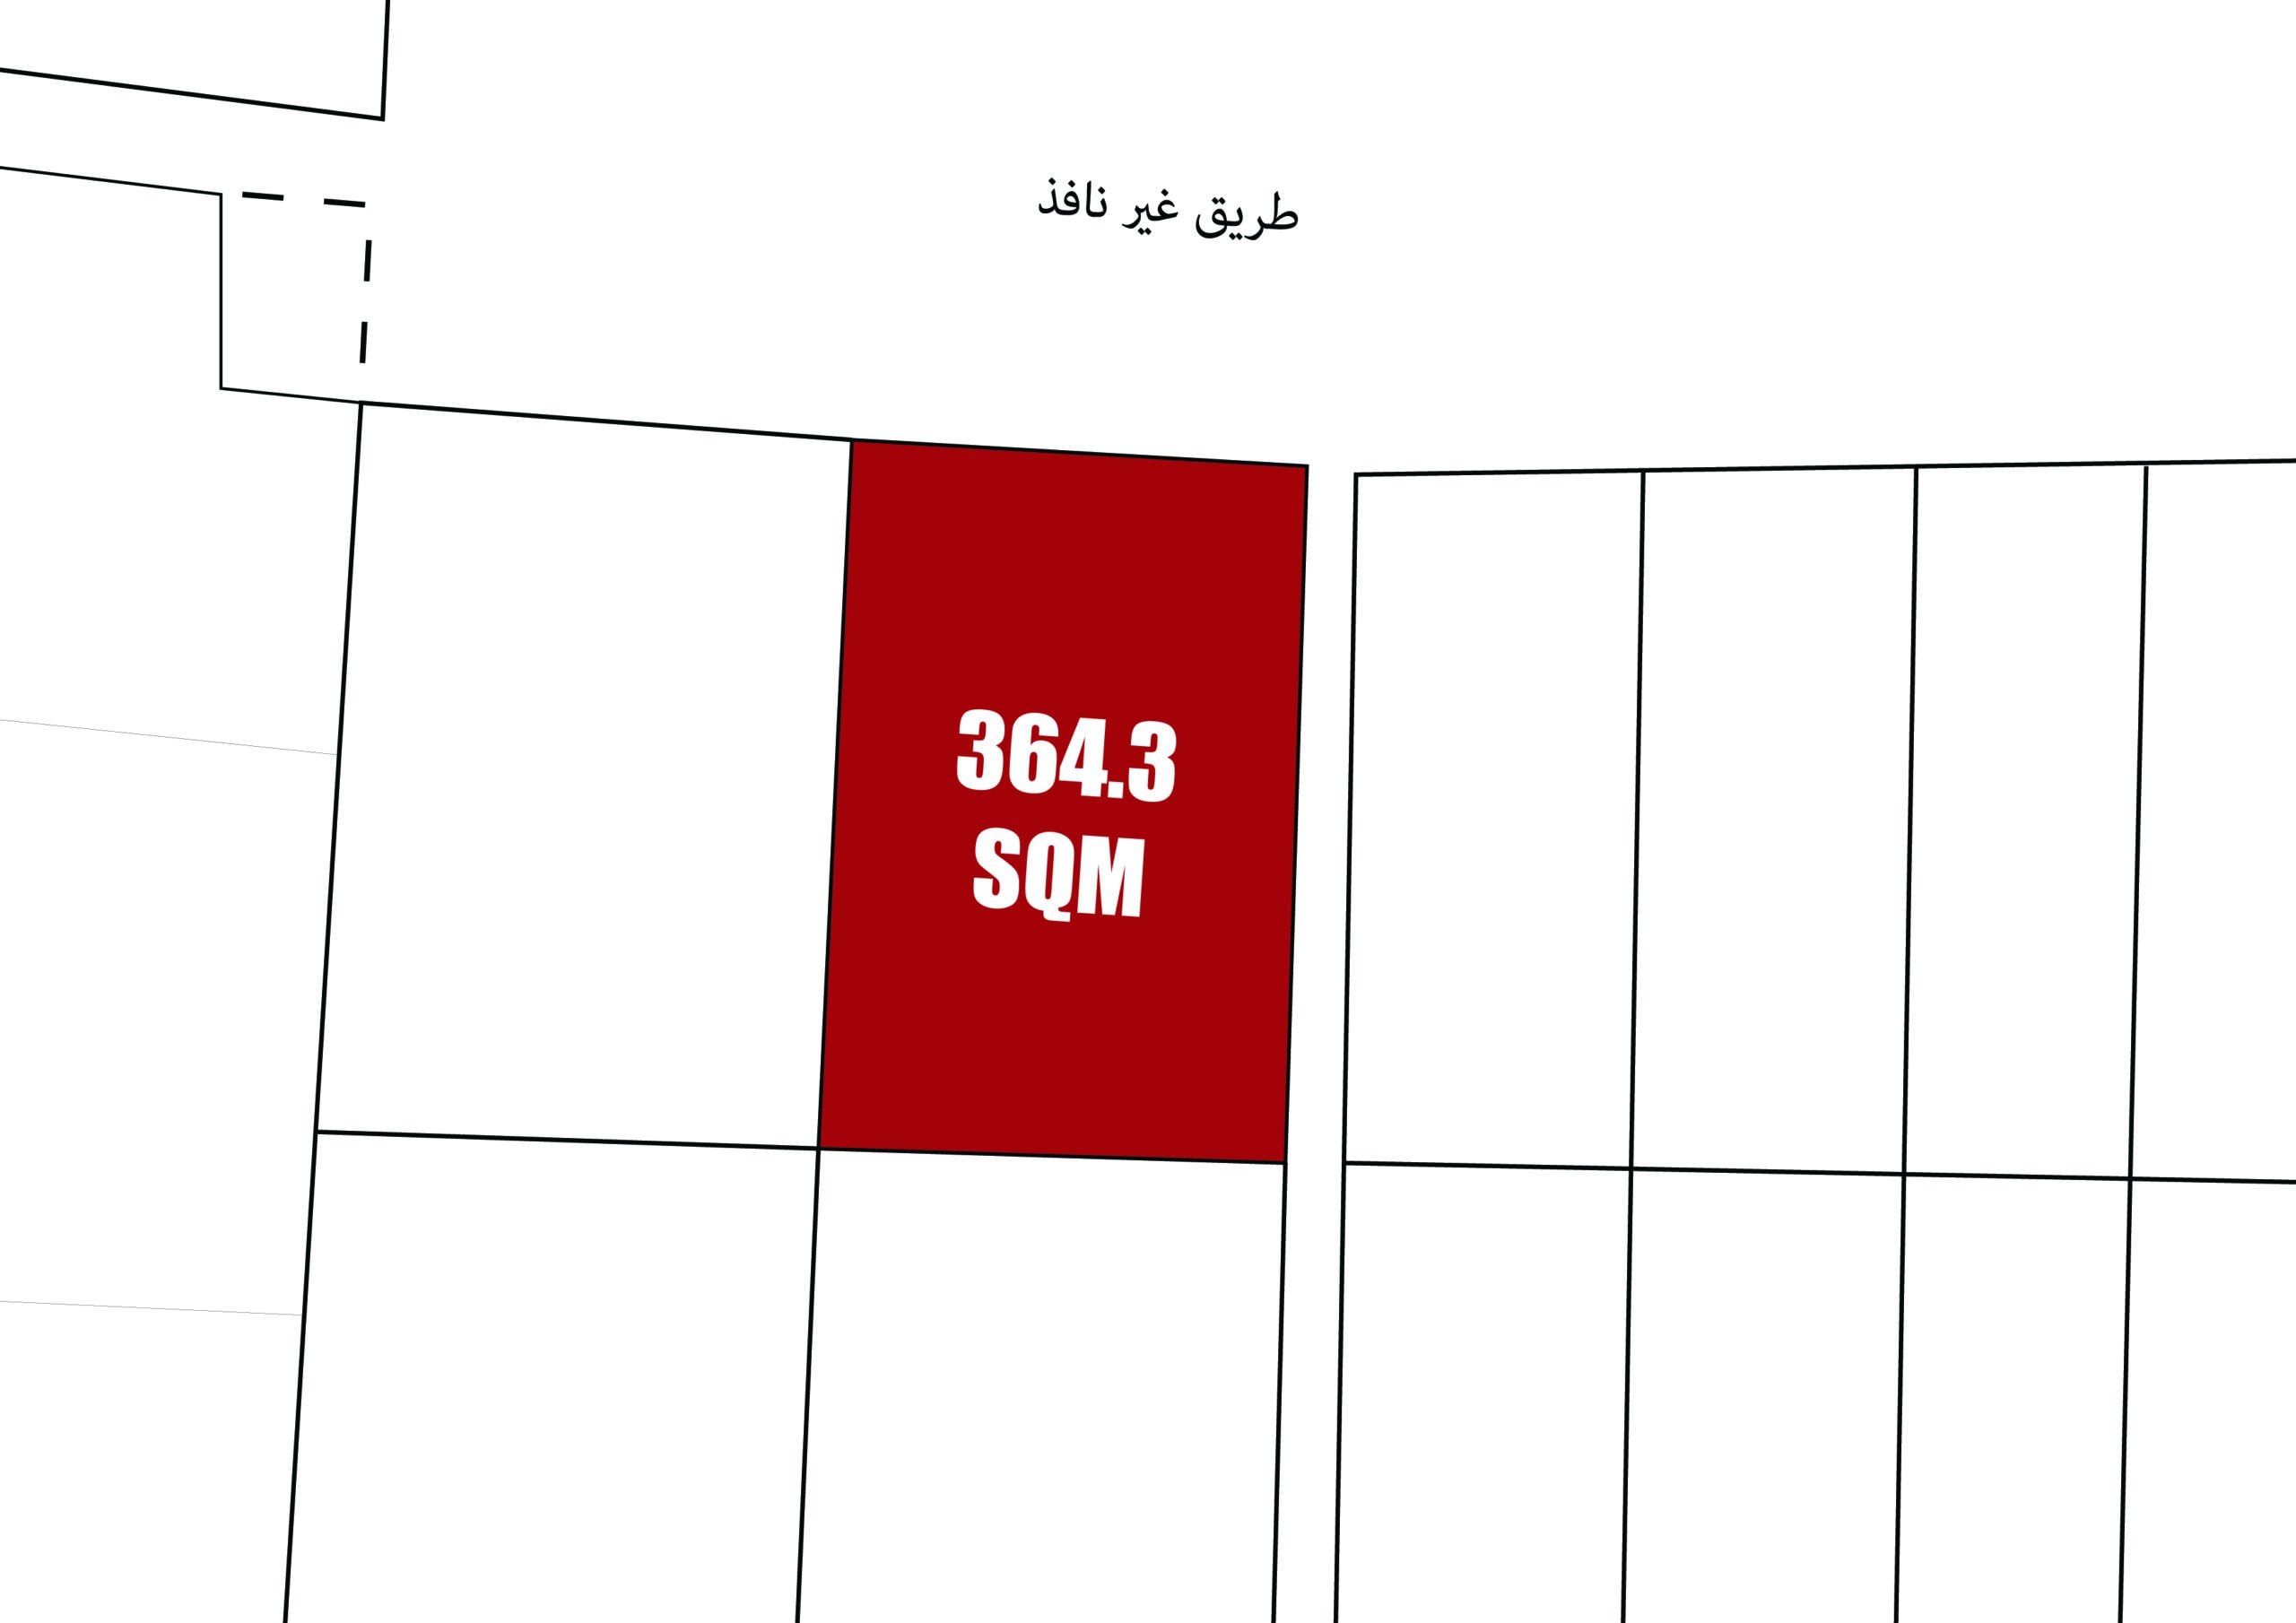 RB Land for Sale in Busaiteen | 364.3 SQM